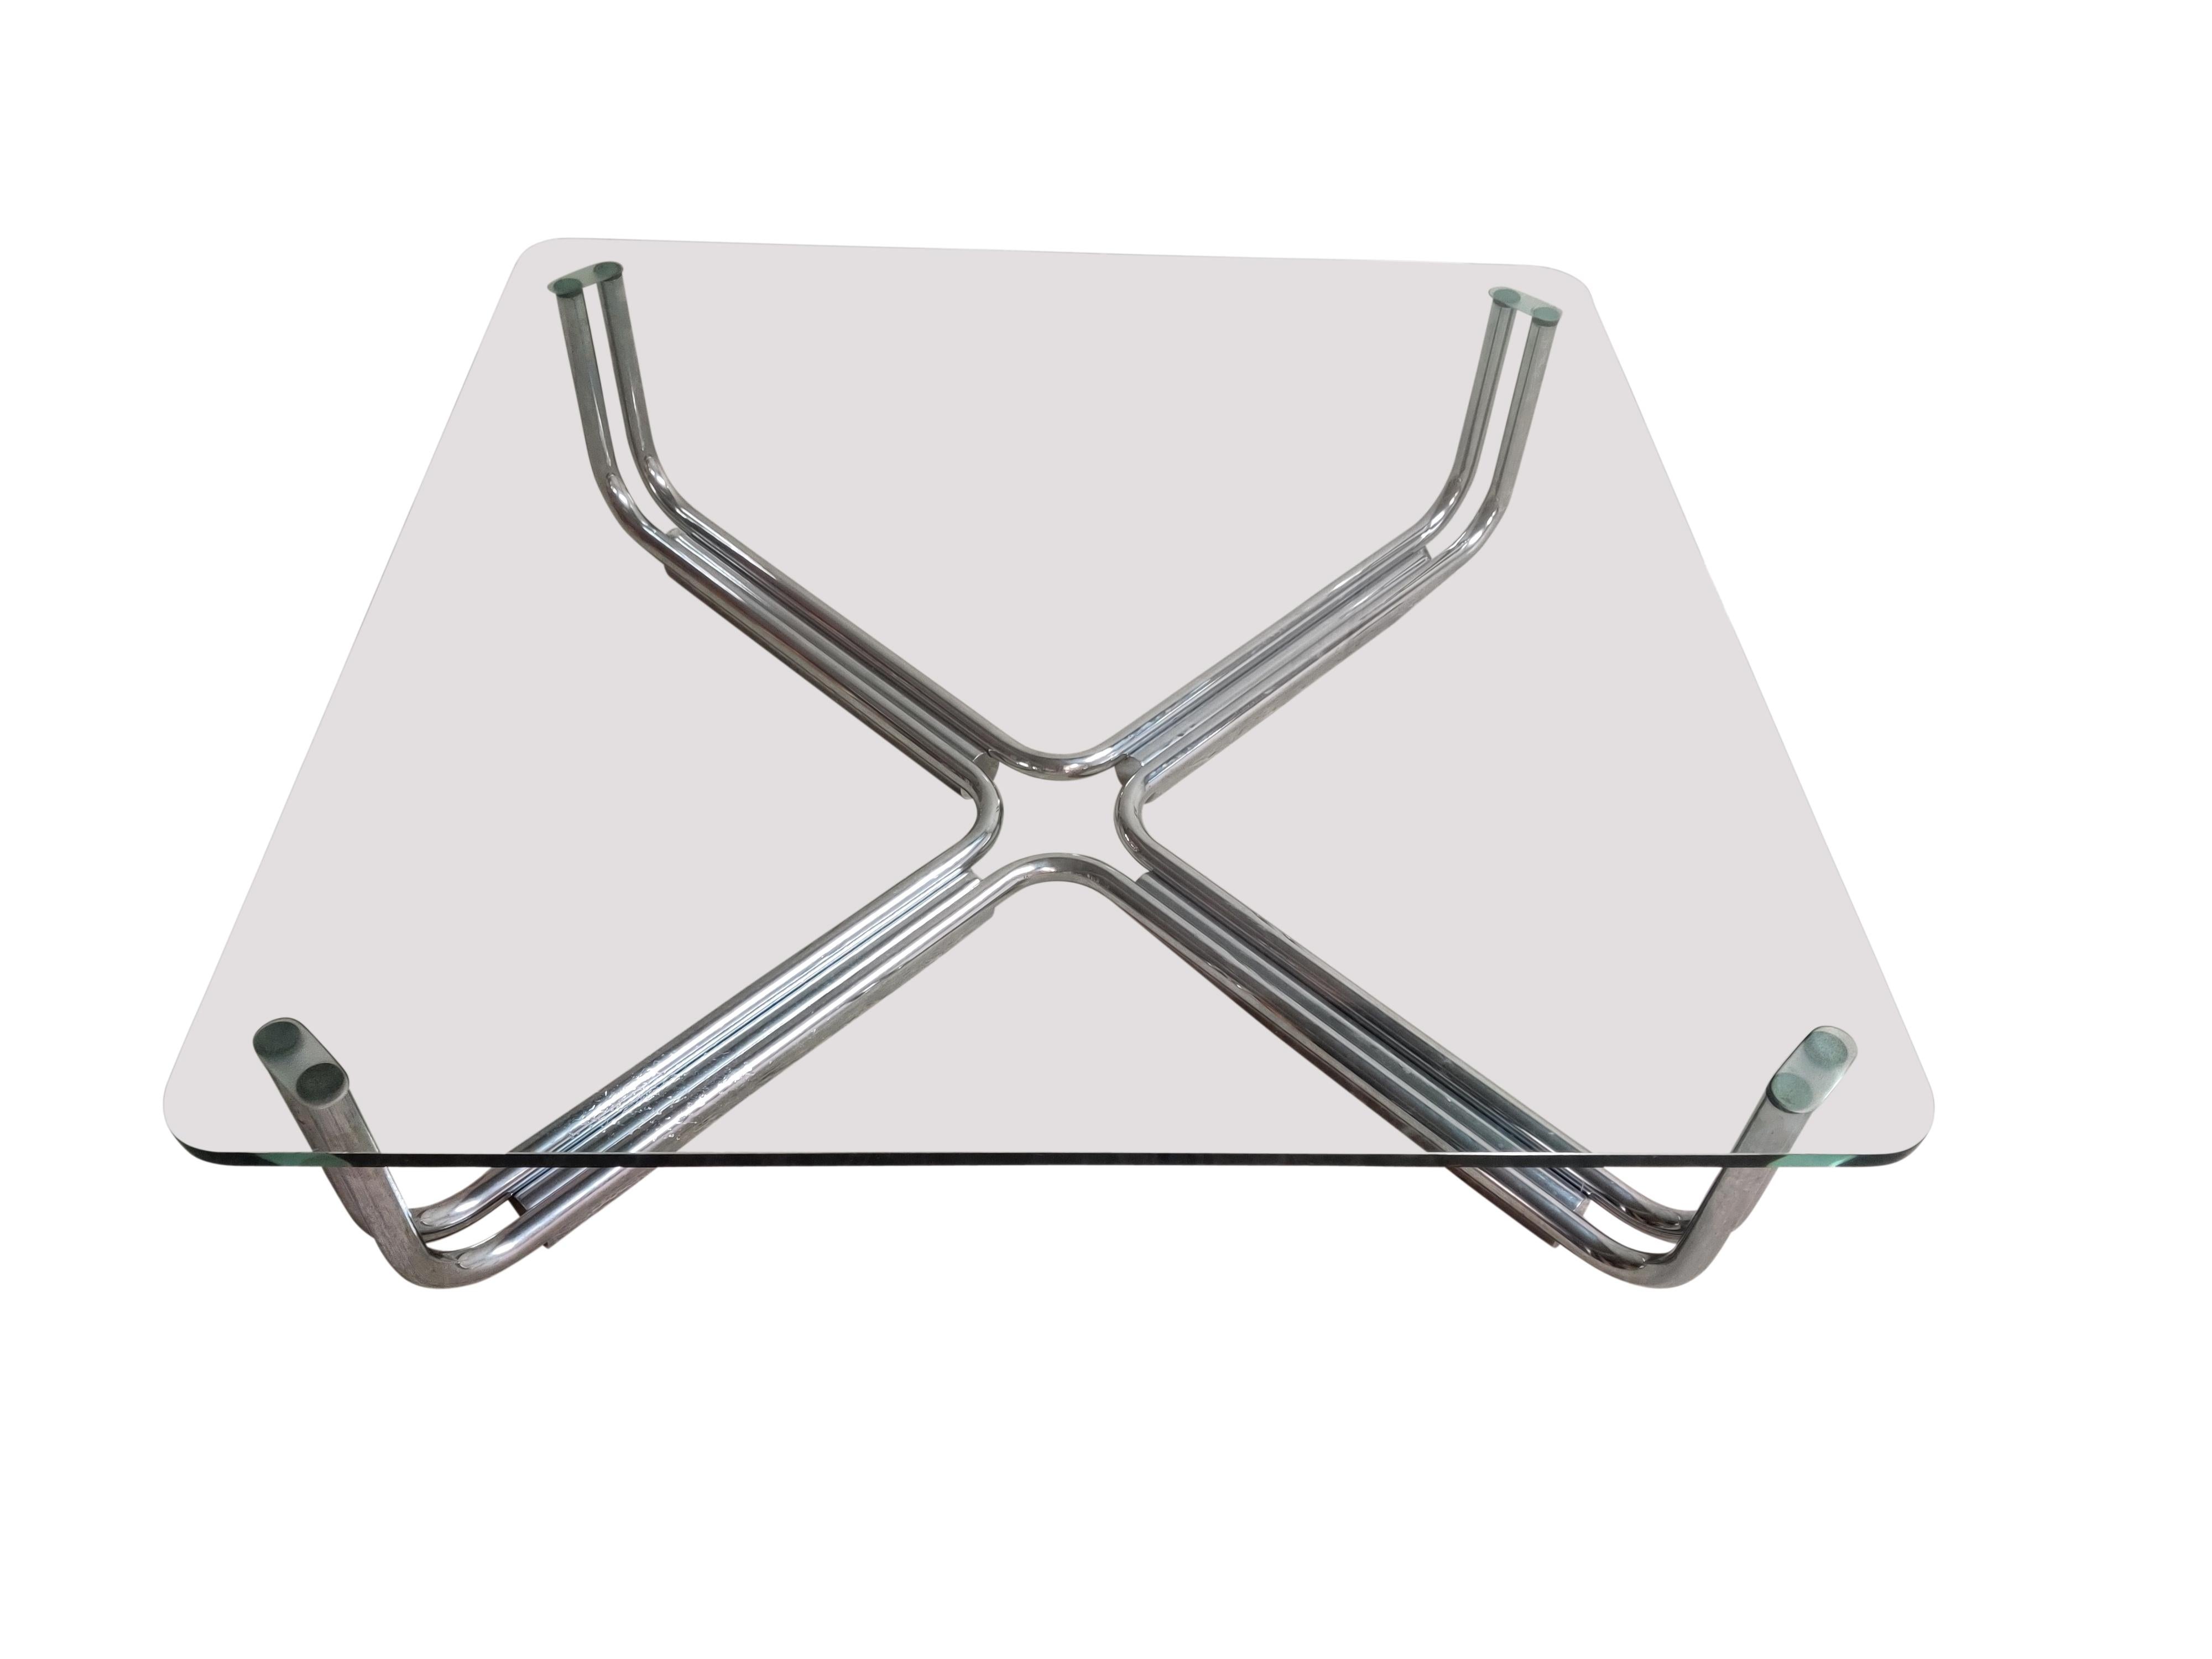 Tubular chrome coffee table with a thick glass top designed by Gianfranco Frattini for Cassina.

'Model 784'.

Very good condition

1960s - Italy

Measures: Height: 31cm/12.20